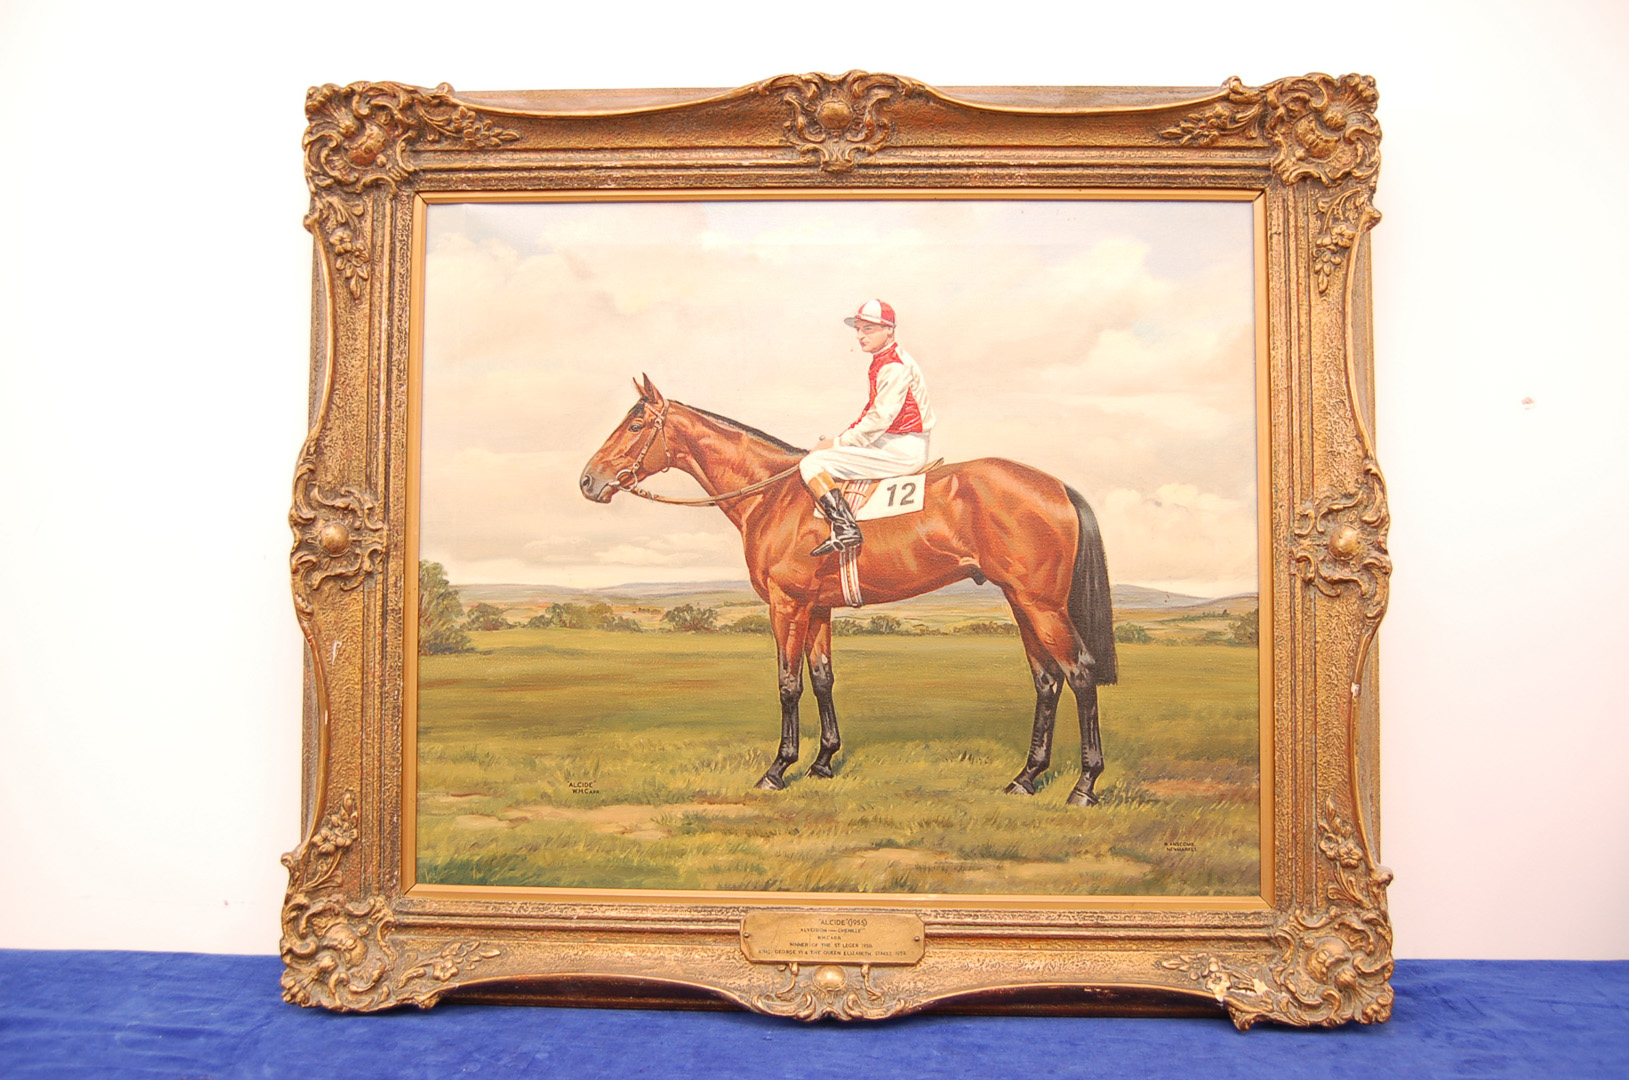 Richard Anscombe (20th century), 48cm by 58cm, oil on canvas, Alcide & WH Carr (racehorse and